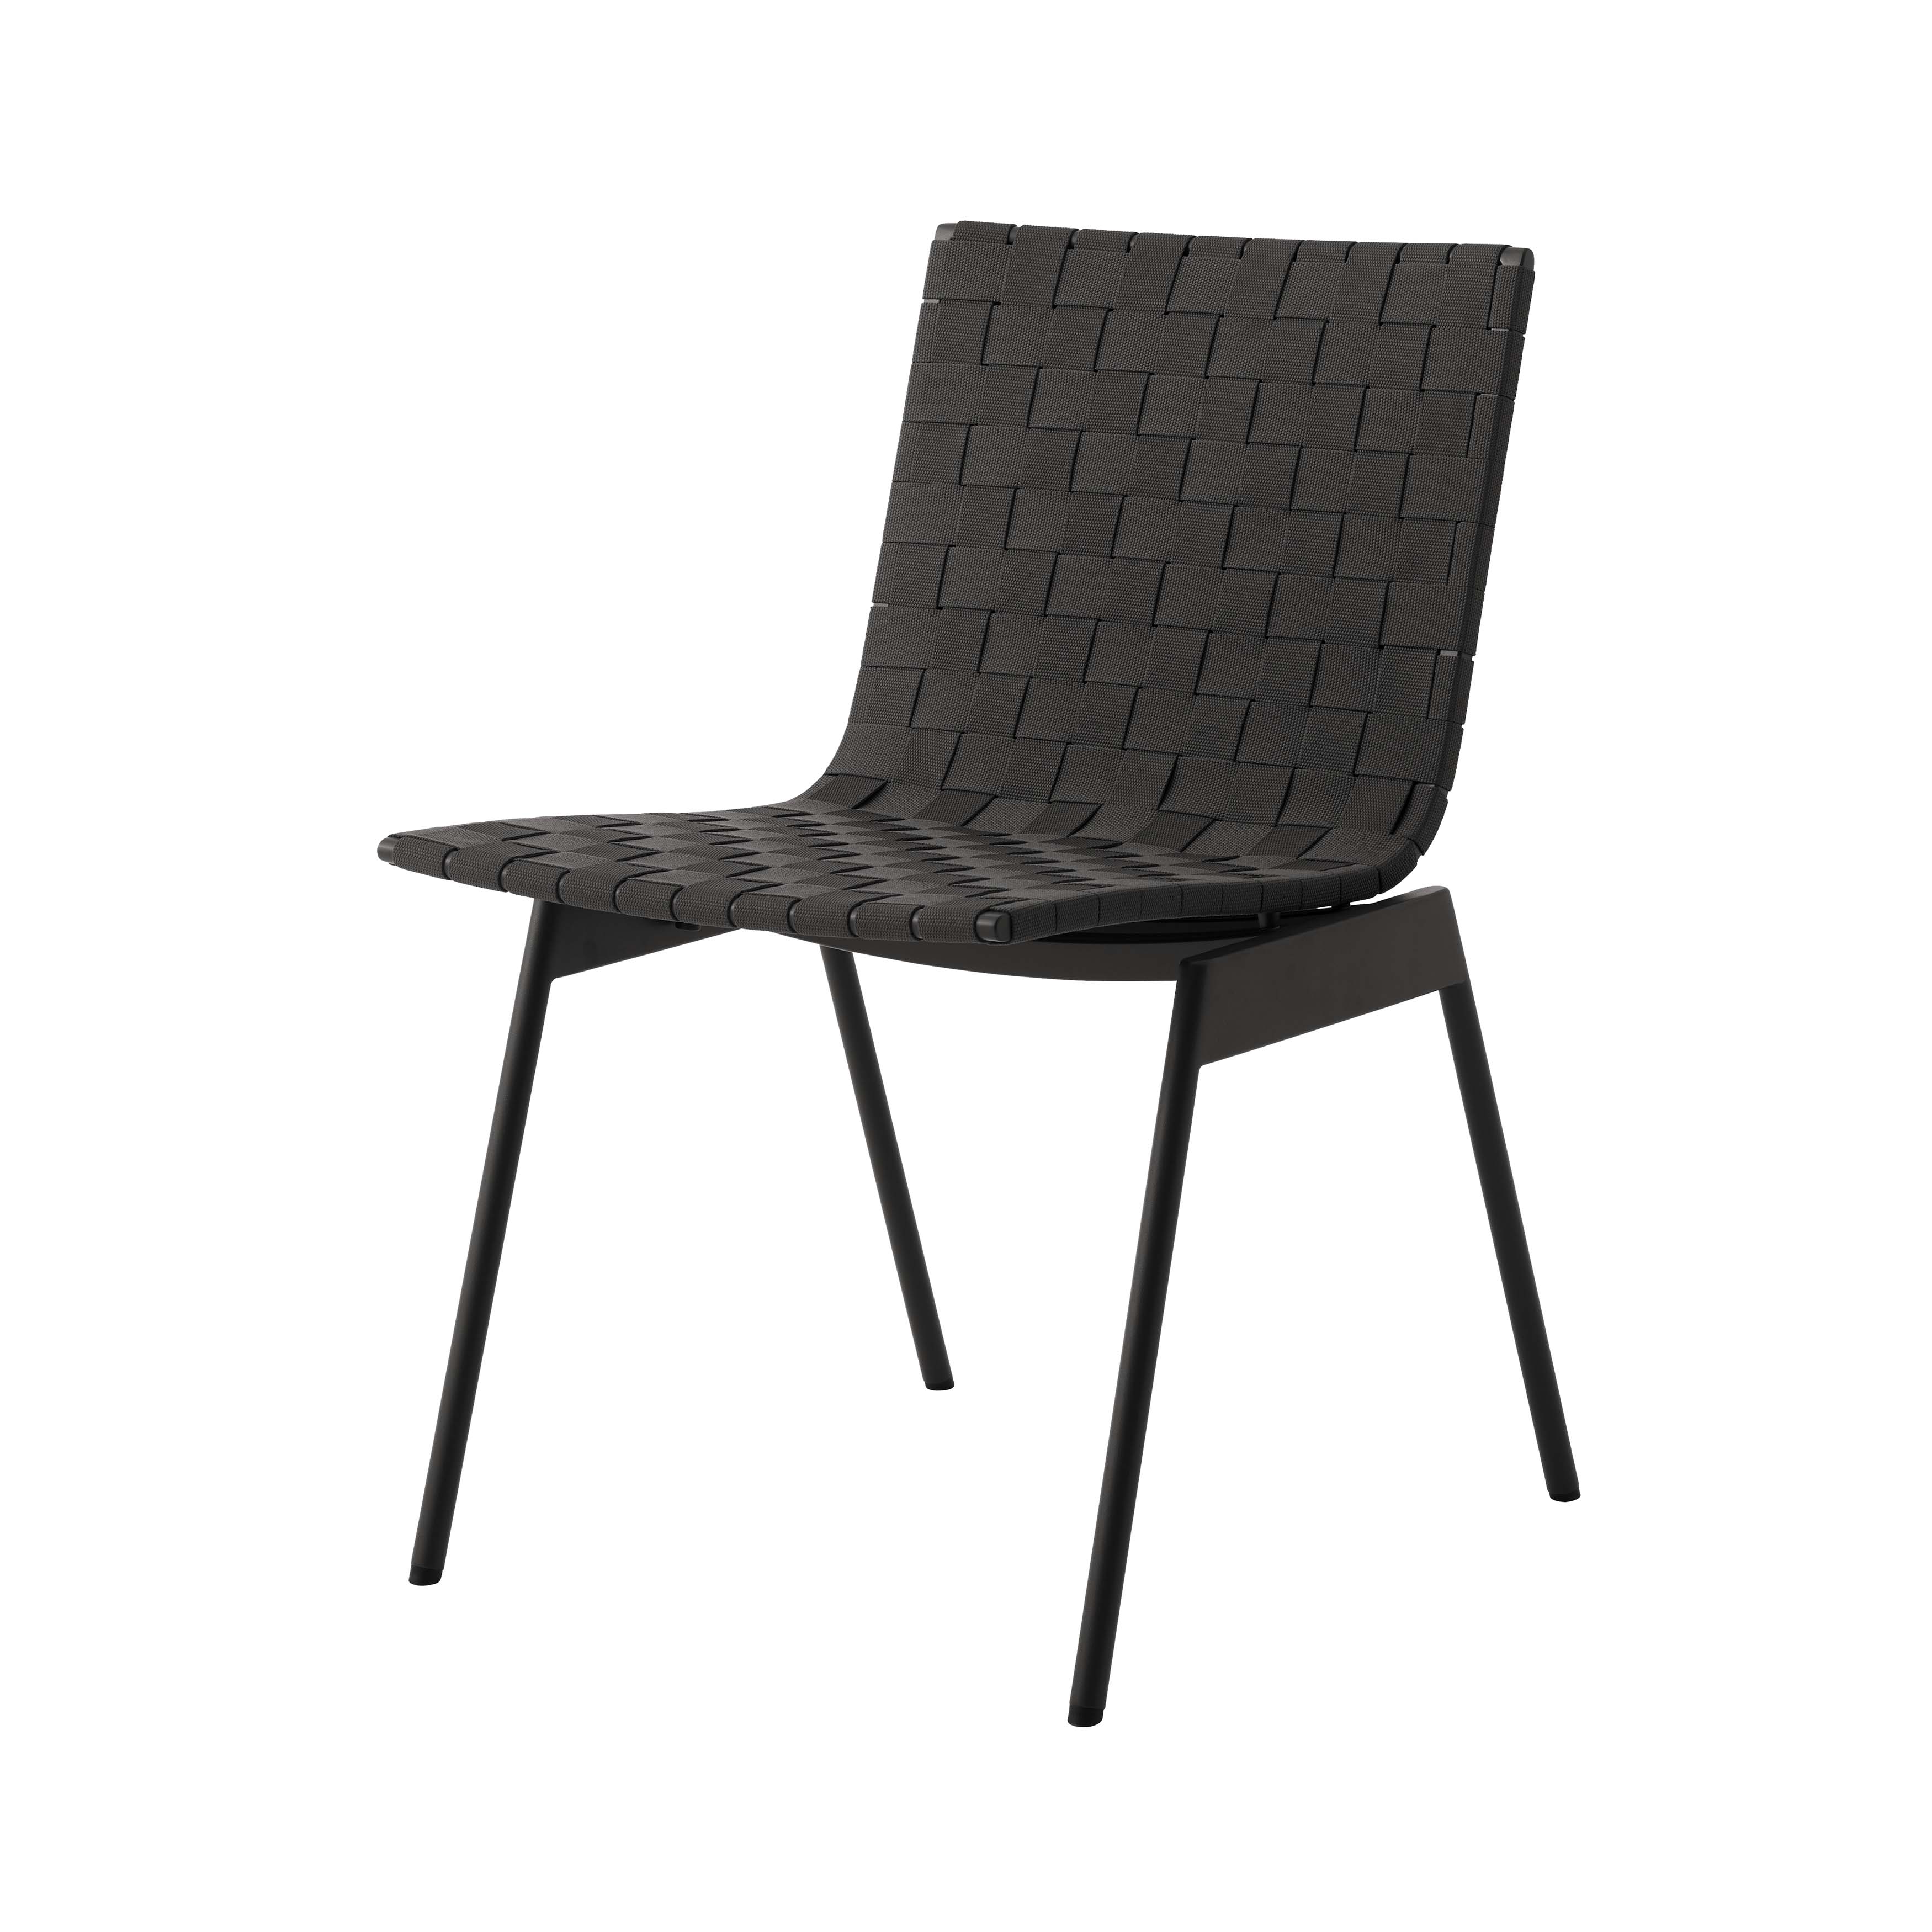 Ville AV33 Side Chair: Outdoor + Warm Black + Without Cushion